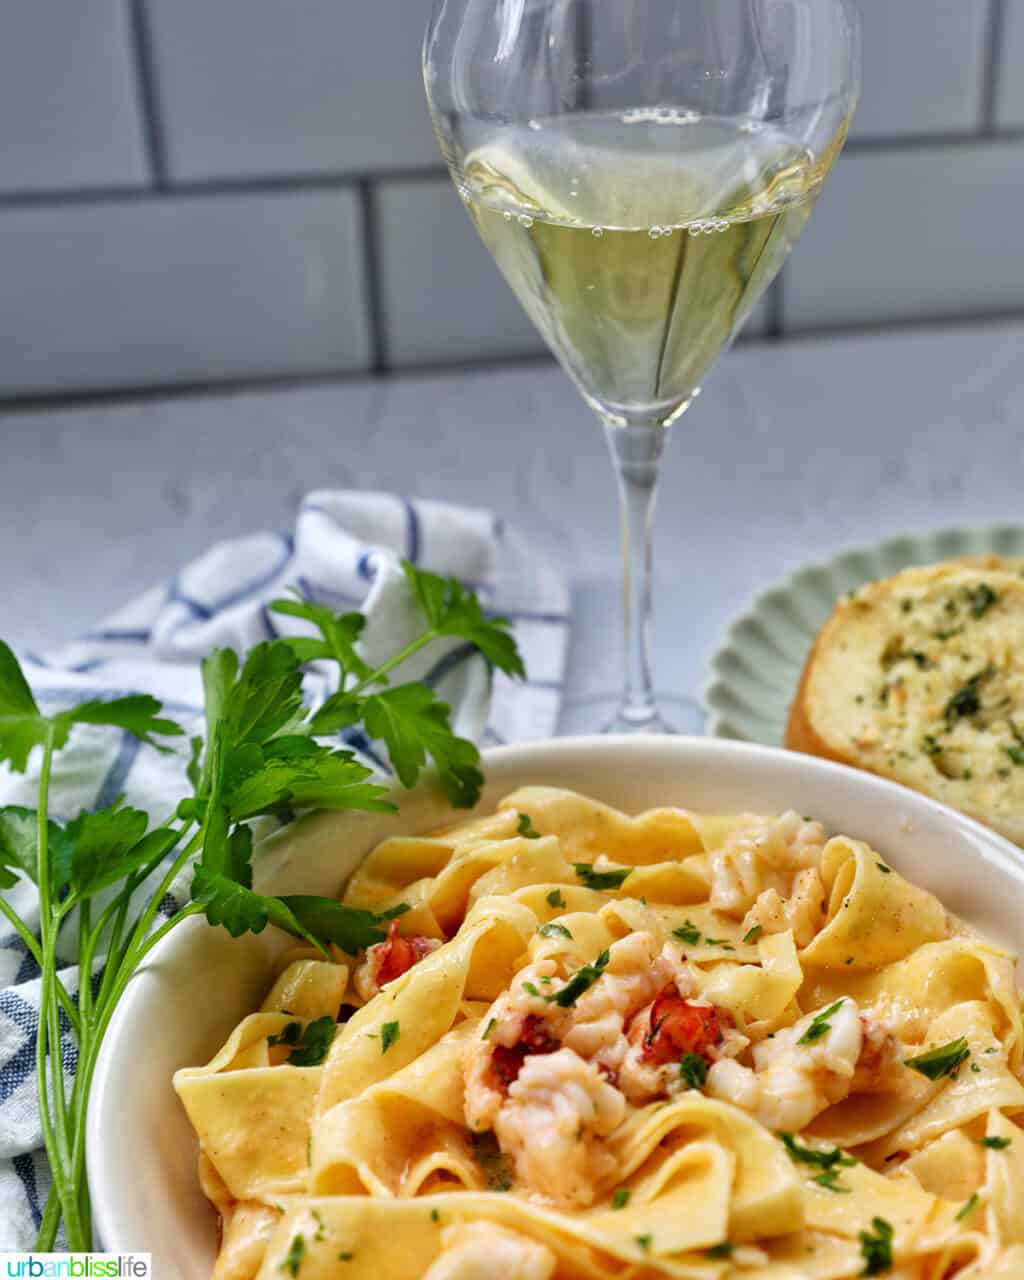 bowl of lobster pasta with side of parsley with glass of white wine.